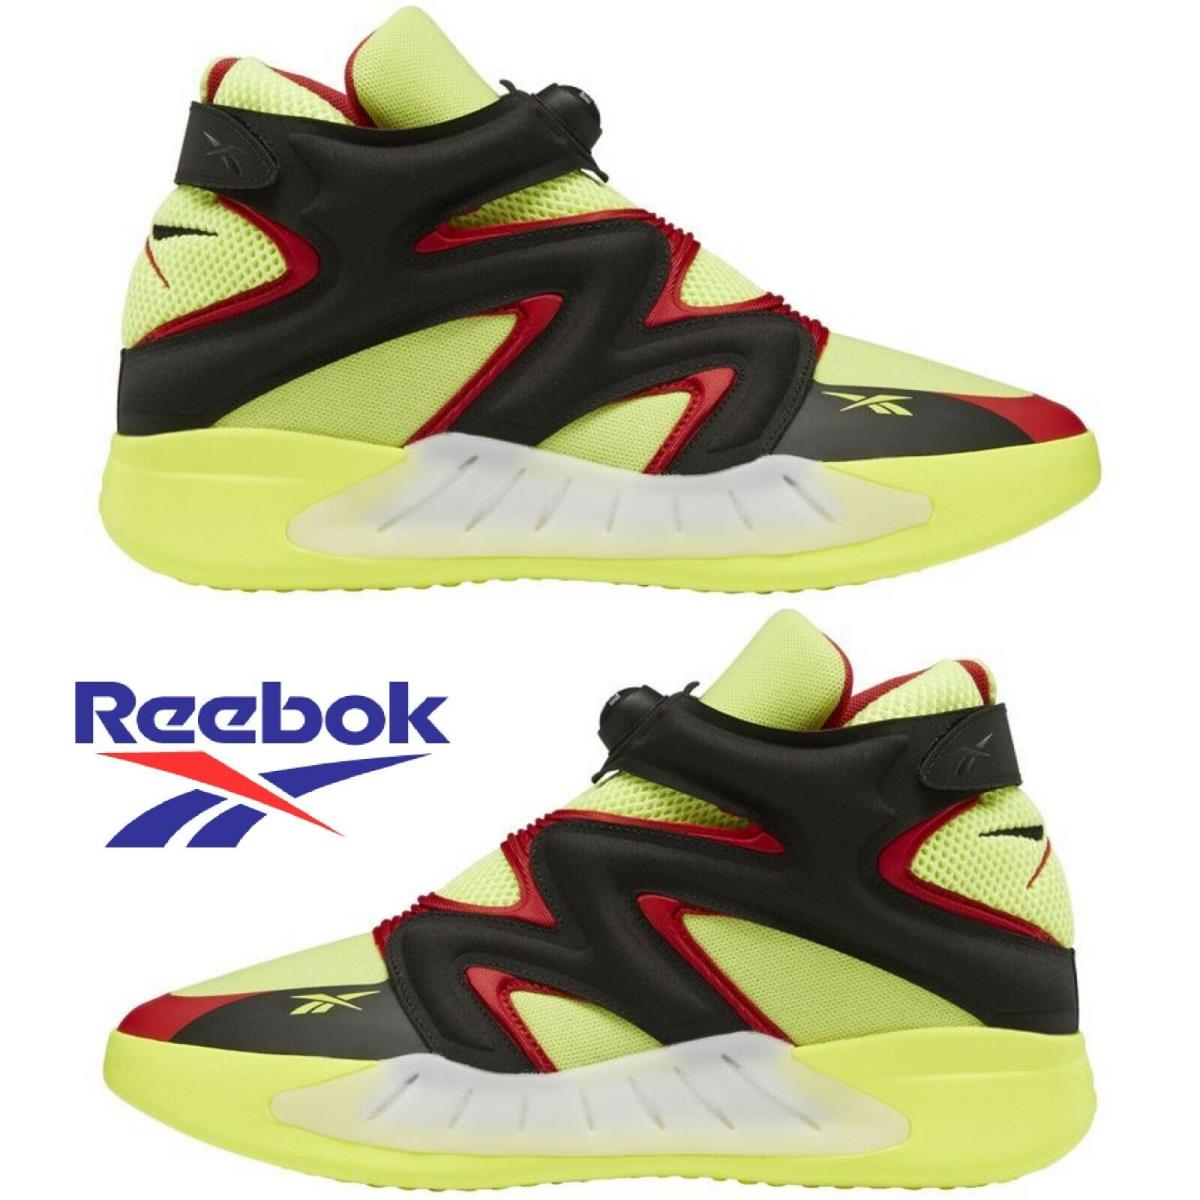 Reebok Instapump Fury Zone Basketball Shoes Men`s Sneakers Running Casual Sport - Black, Manufacturer: Yellow/Black/Red